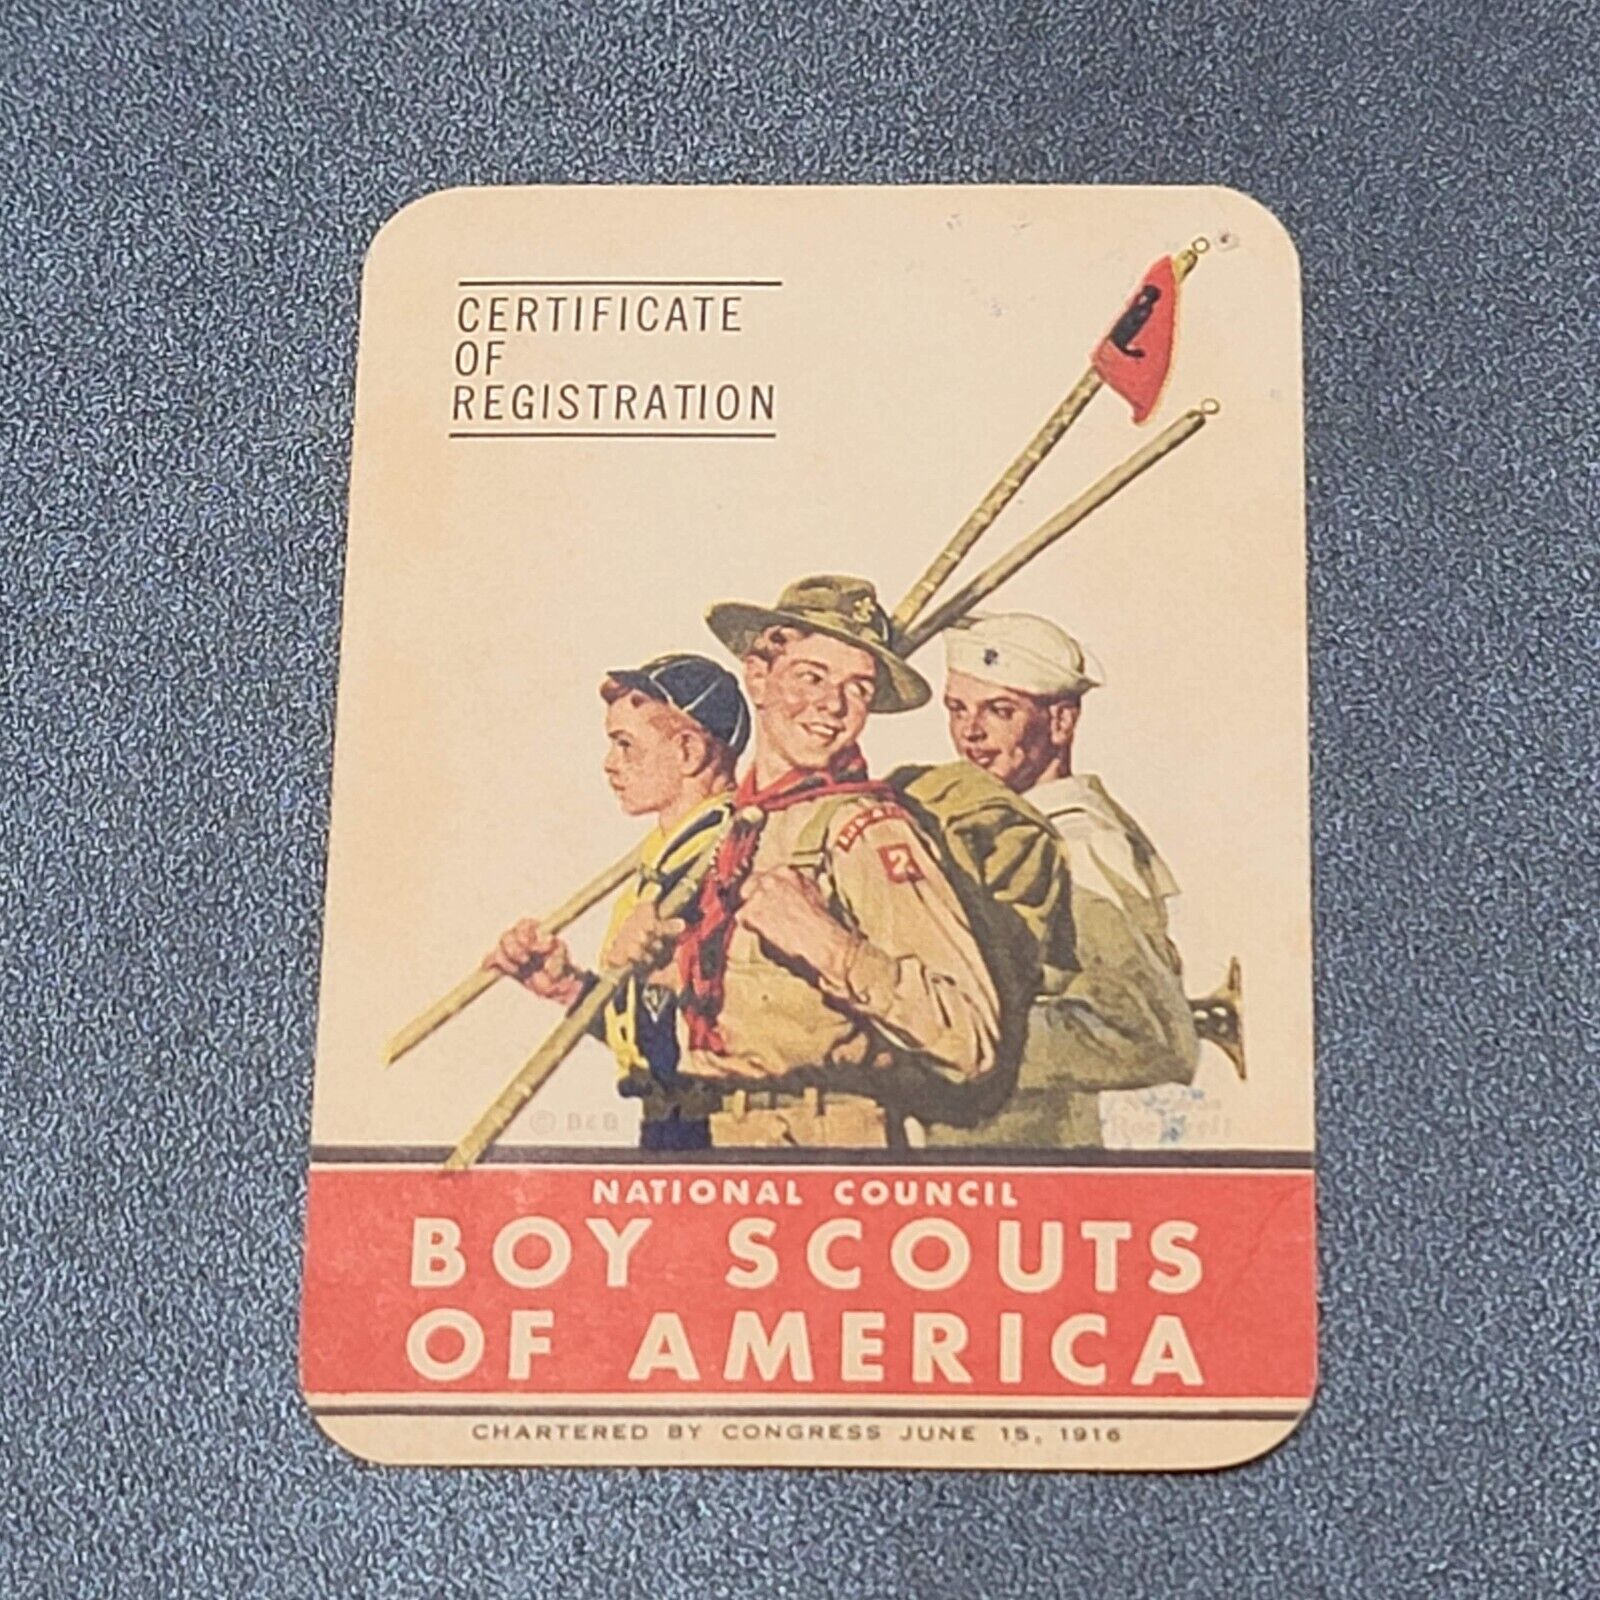 Vintage 1952 53 Boy Scouts of America National Council Certificate Registration